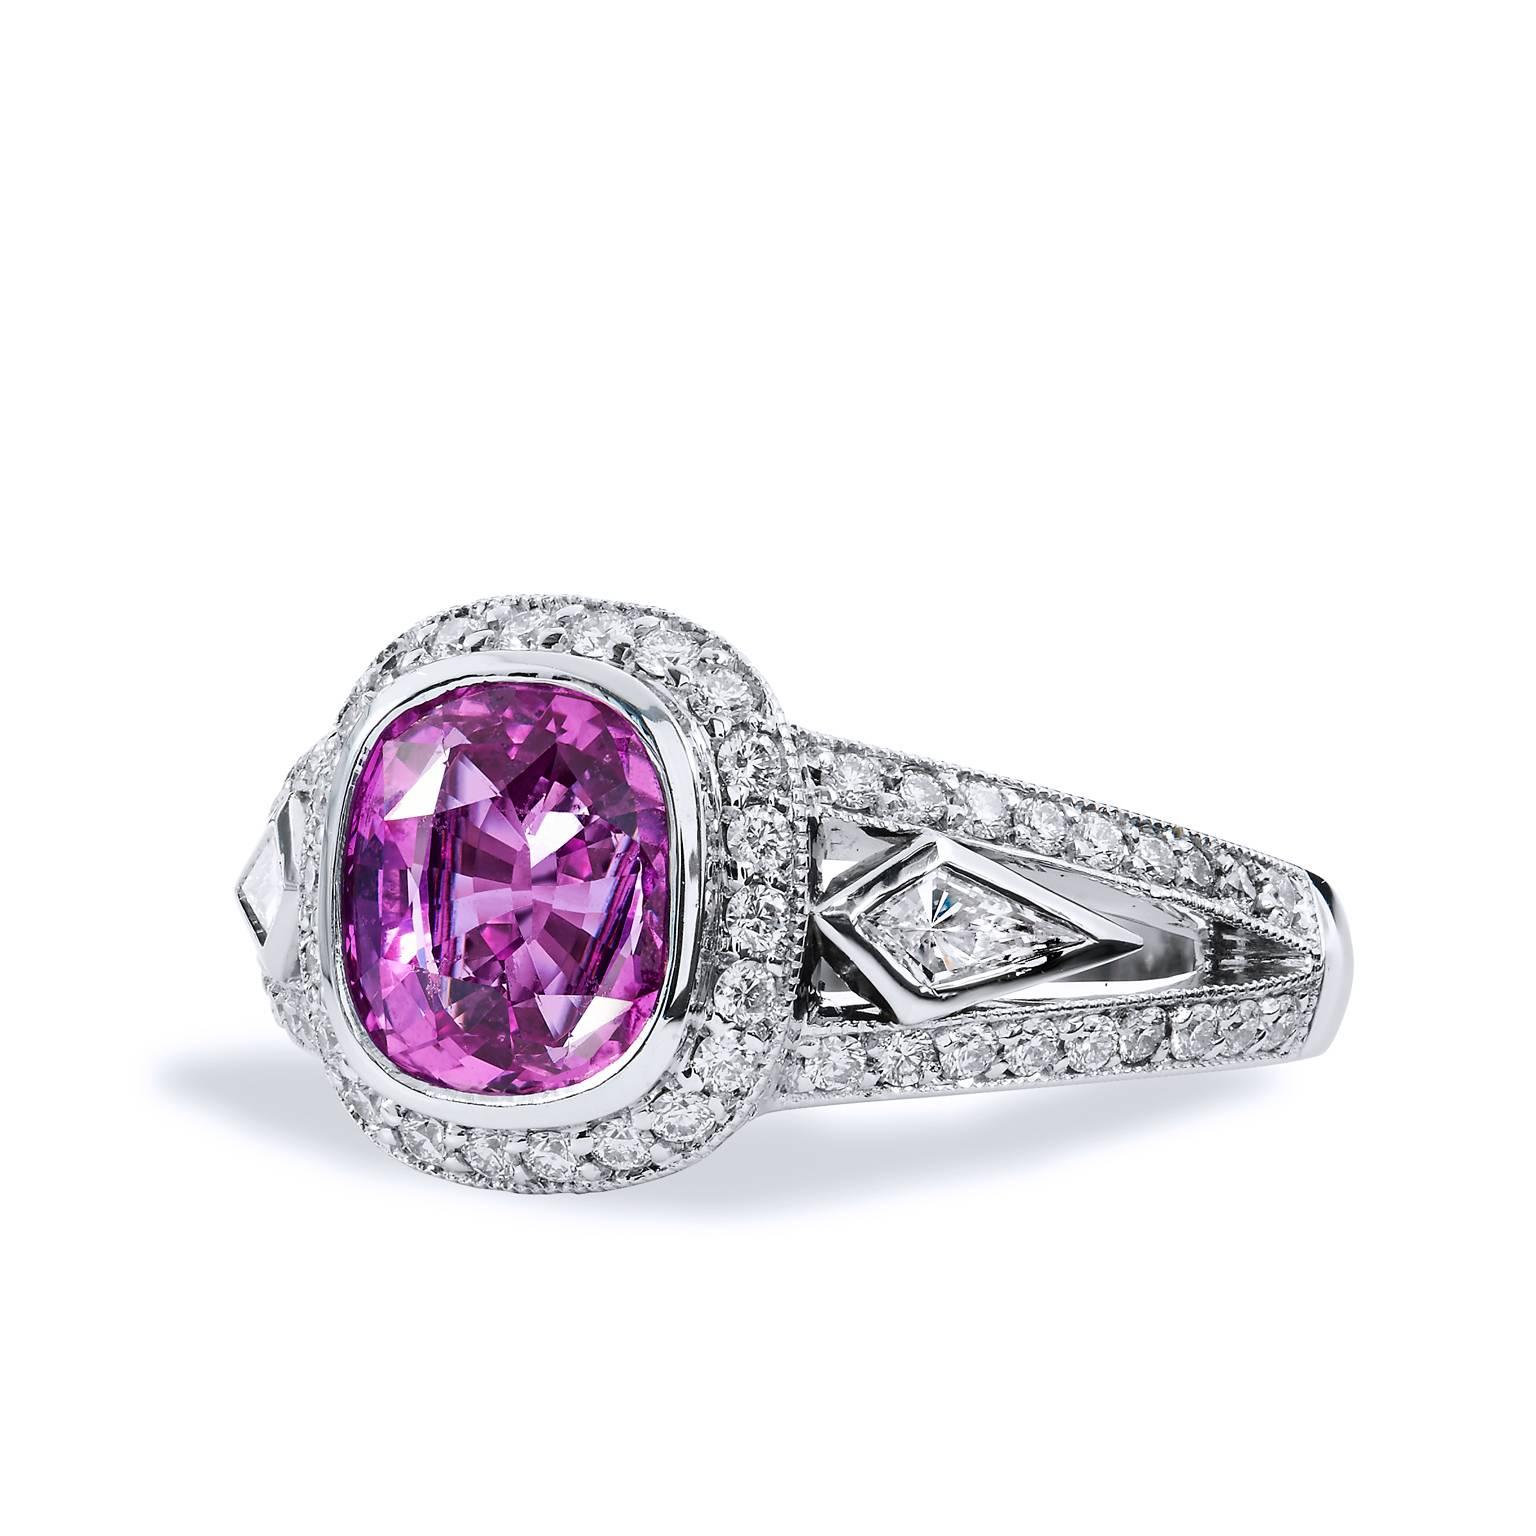 Crafted in 18kt white gold, this ring features a majestic 2.62ct pink sapphire with .48cts of F VS graded diamonds pave set around the center gemstone. Set in the shank are two kite shaped diamonds that flank either side of the pink sapphire